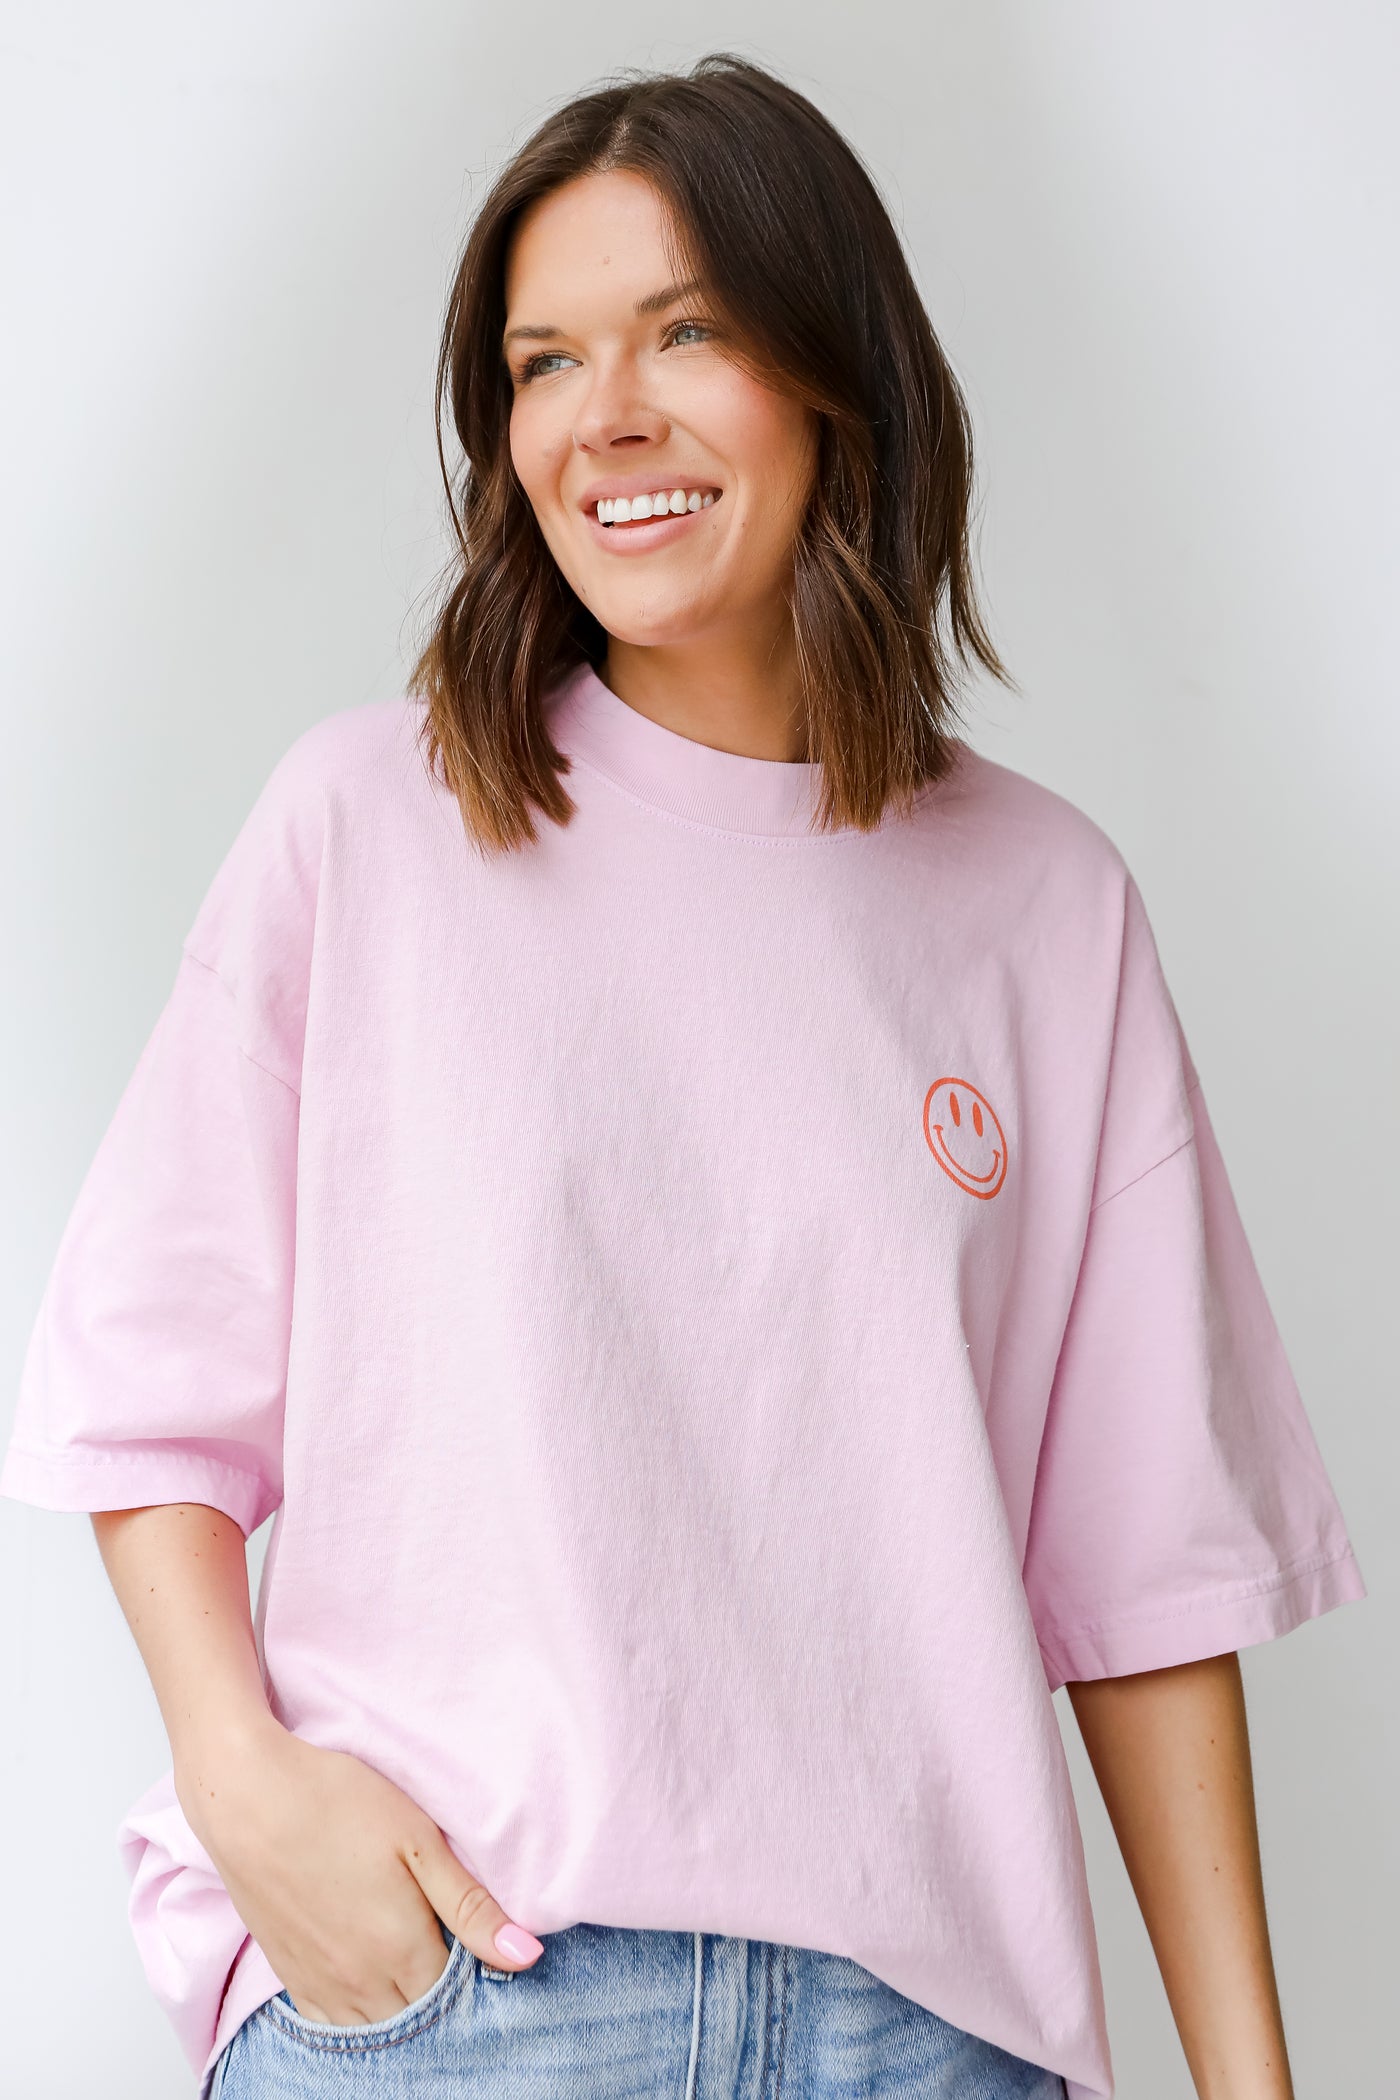 Love Forever Smiley Face Graphic Tee on model